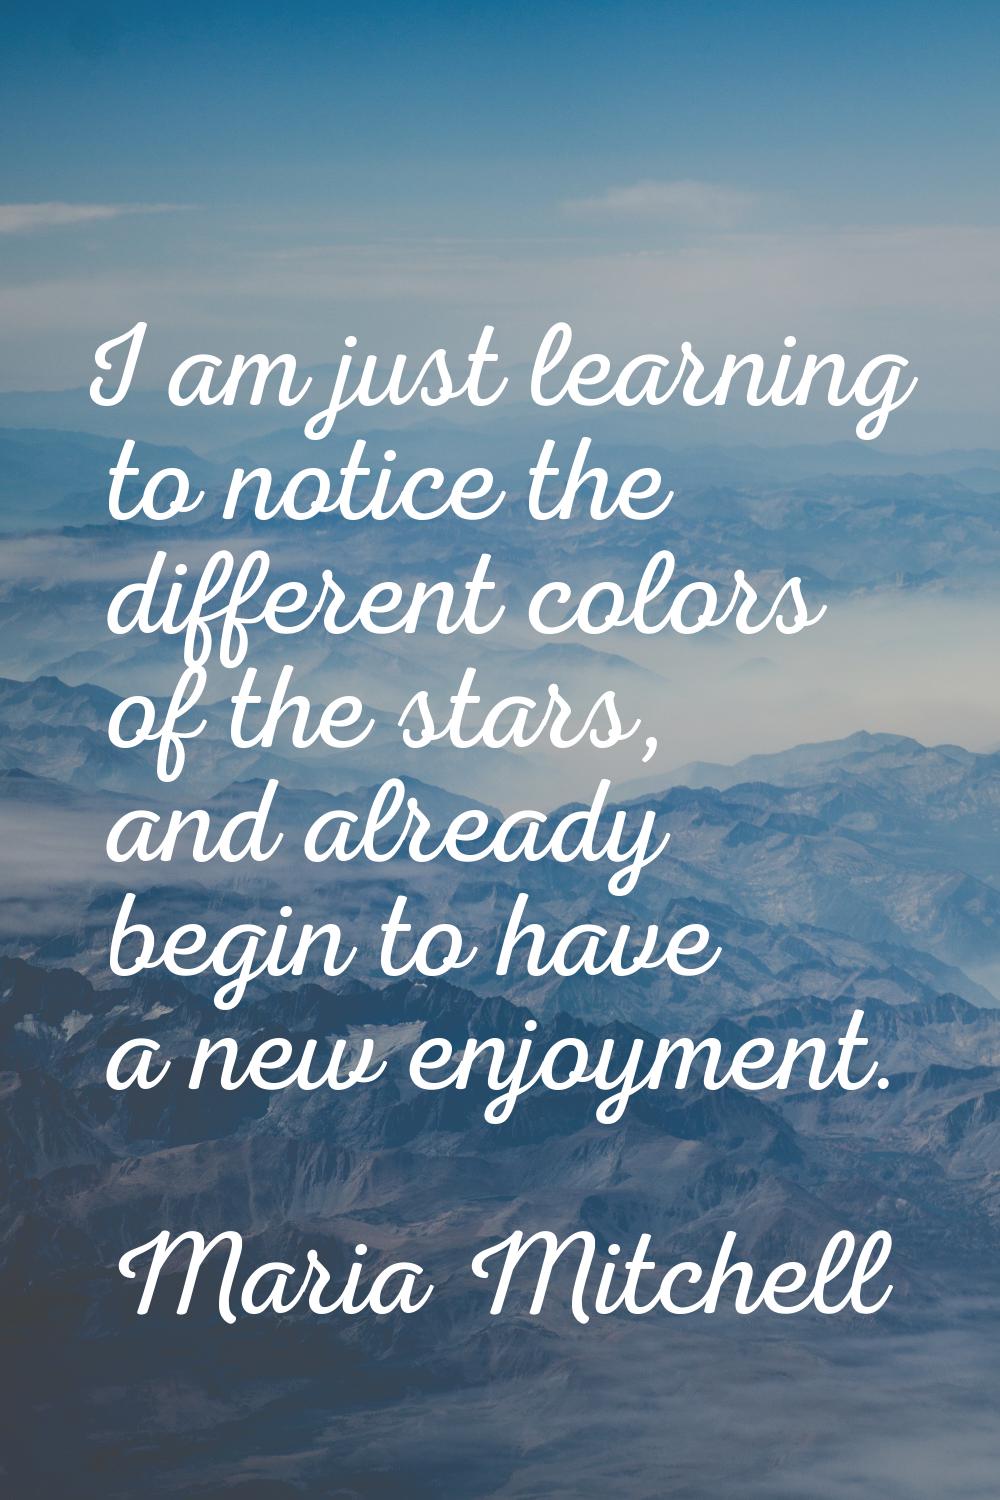 I am just learning to notice the different colors of the stars, and already begin to have a new enj